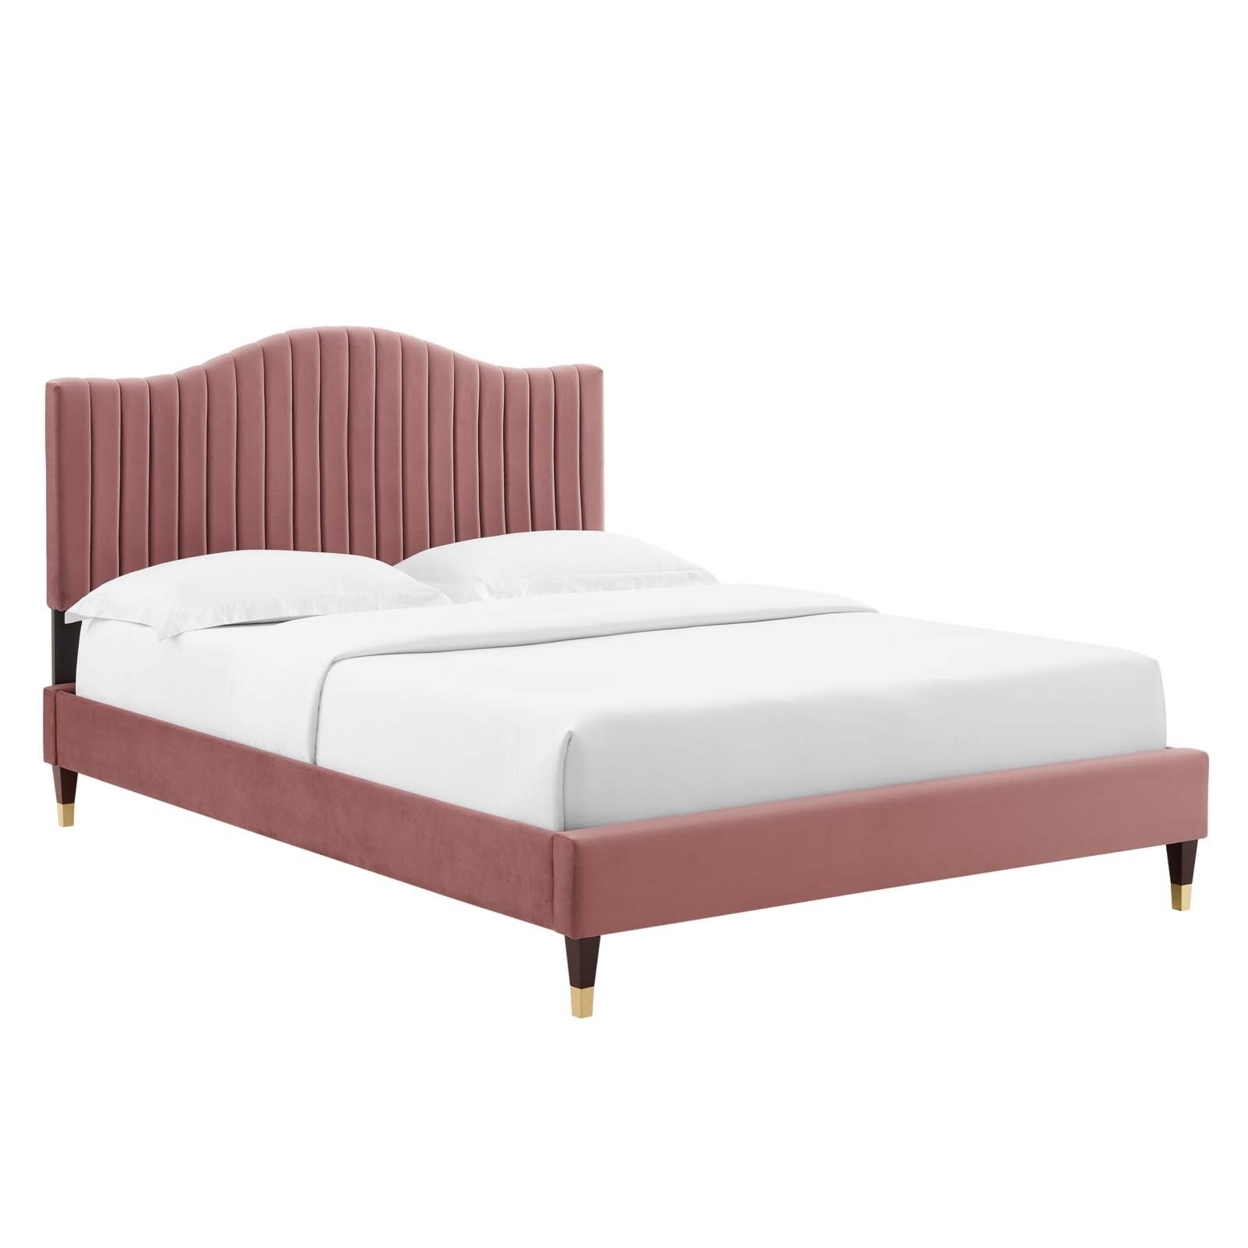 Twin Size Platform Bed, Dusty Pink Velvet, Vertical Channel Tufting